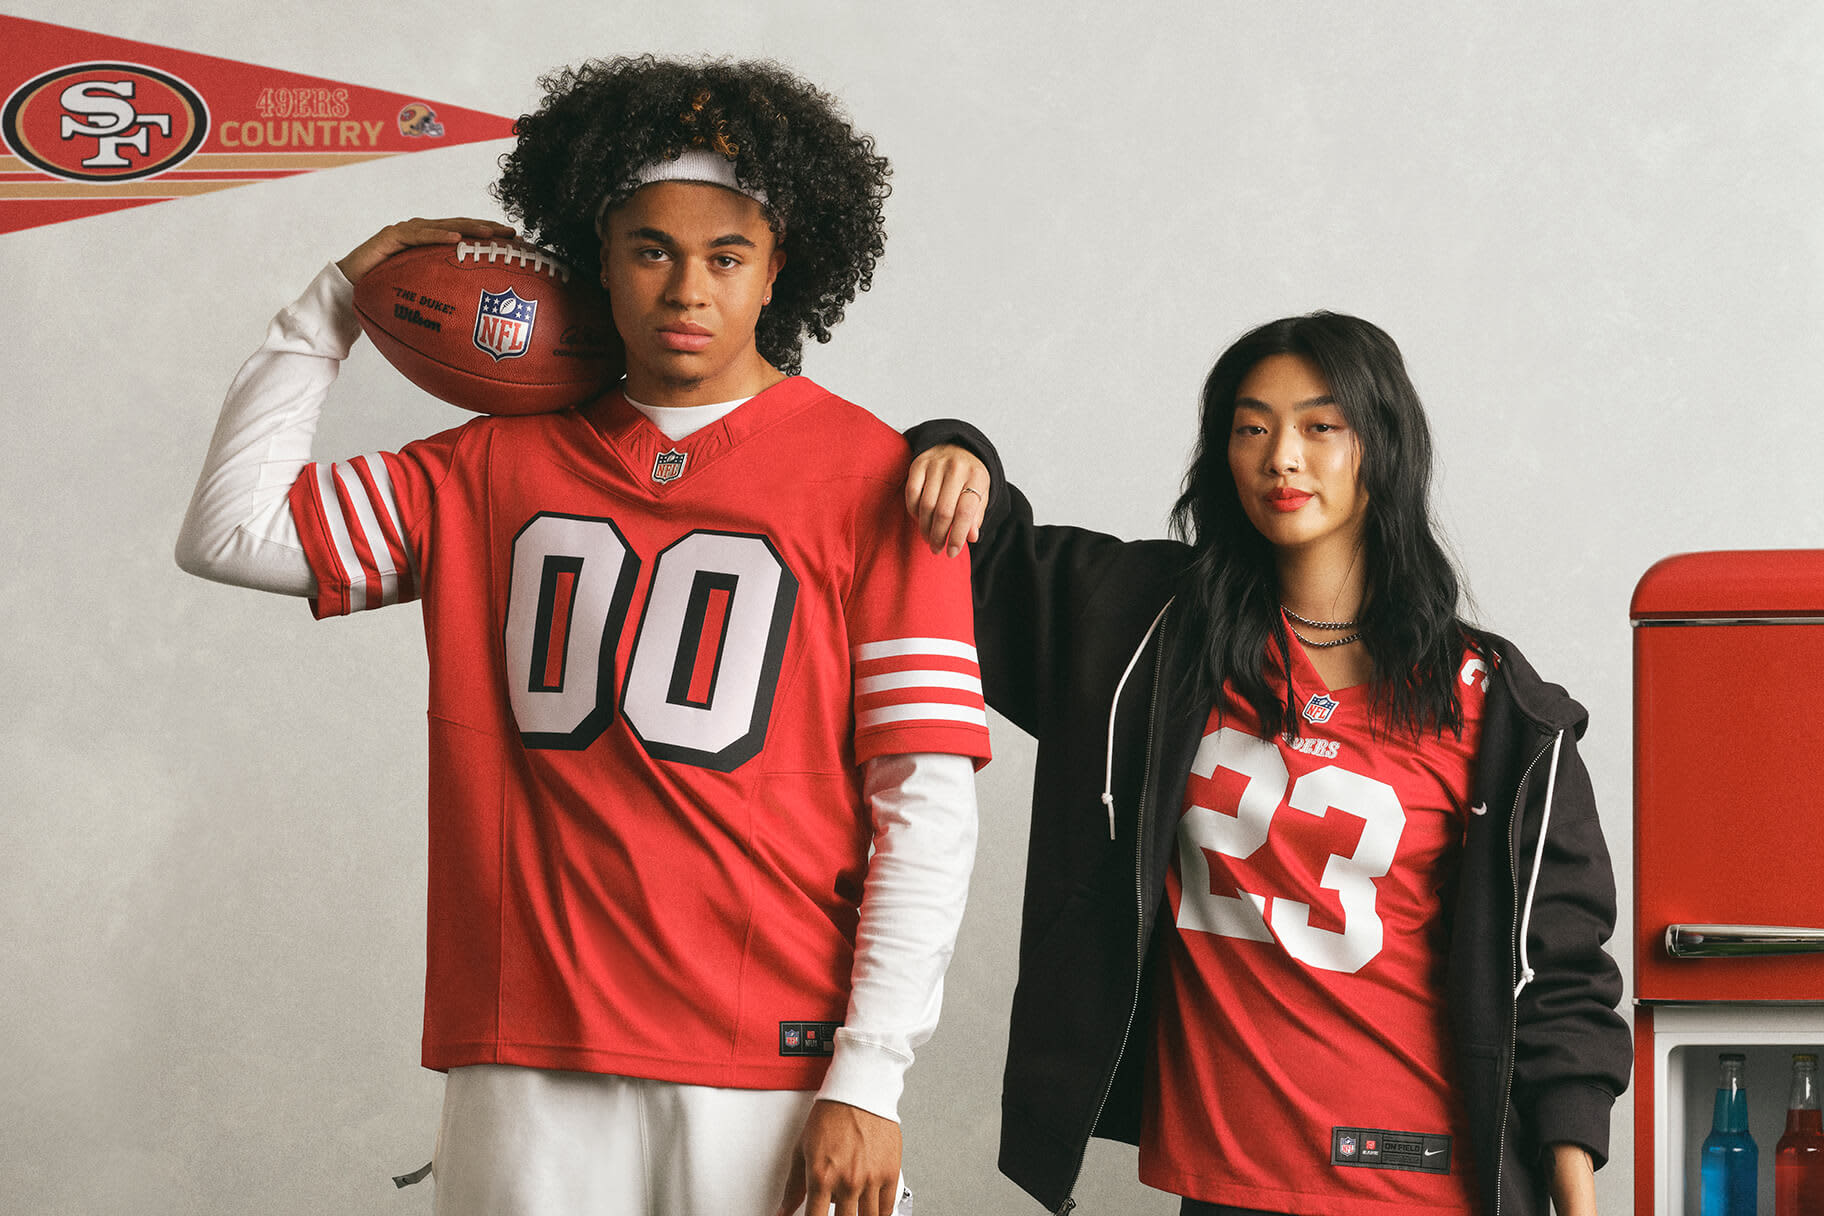 8 Nike Outfit Essentials to Wear to an American Football Game